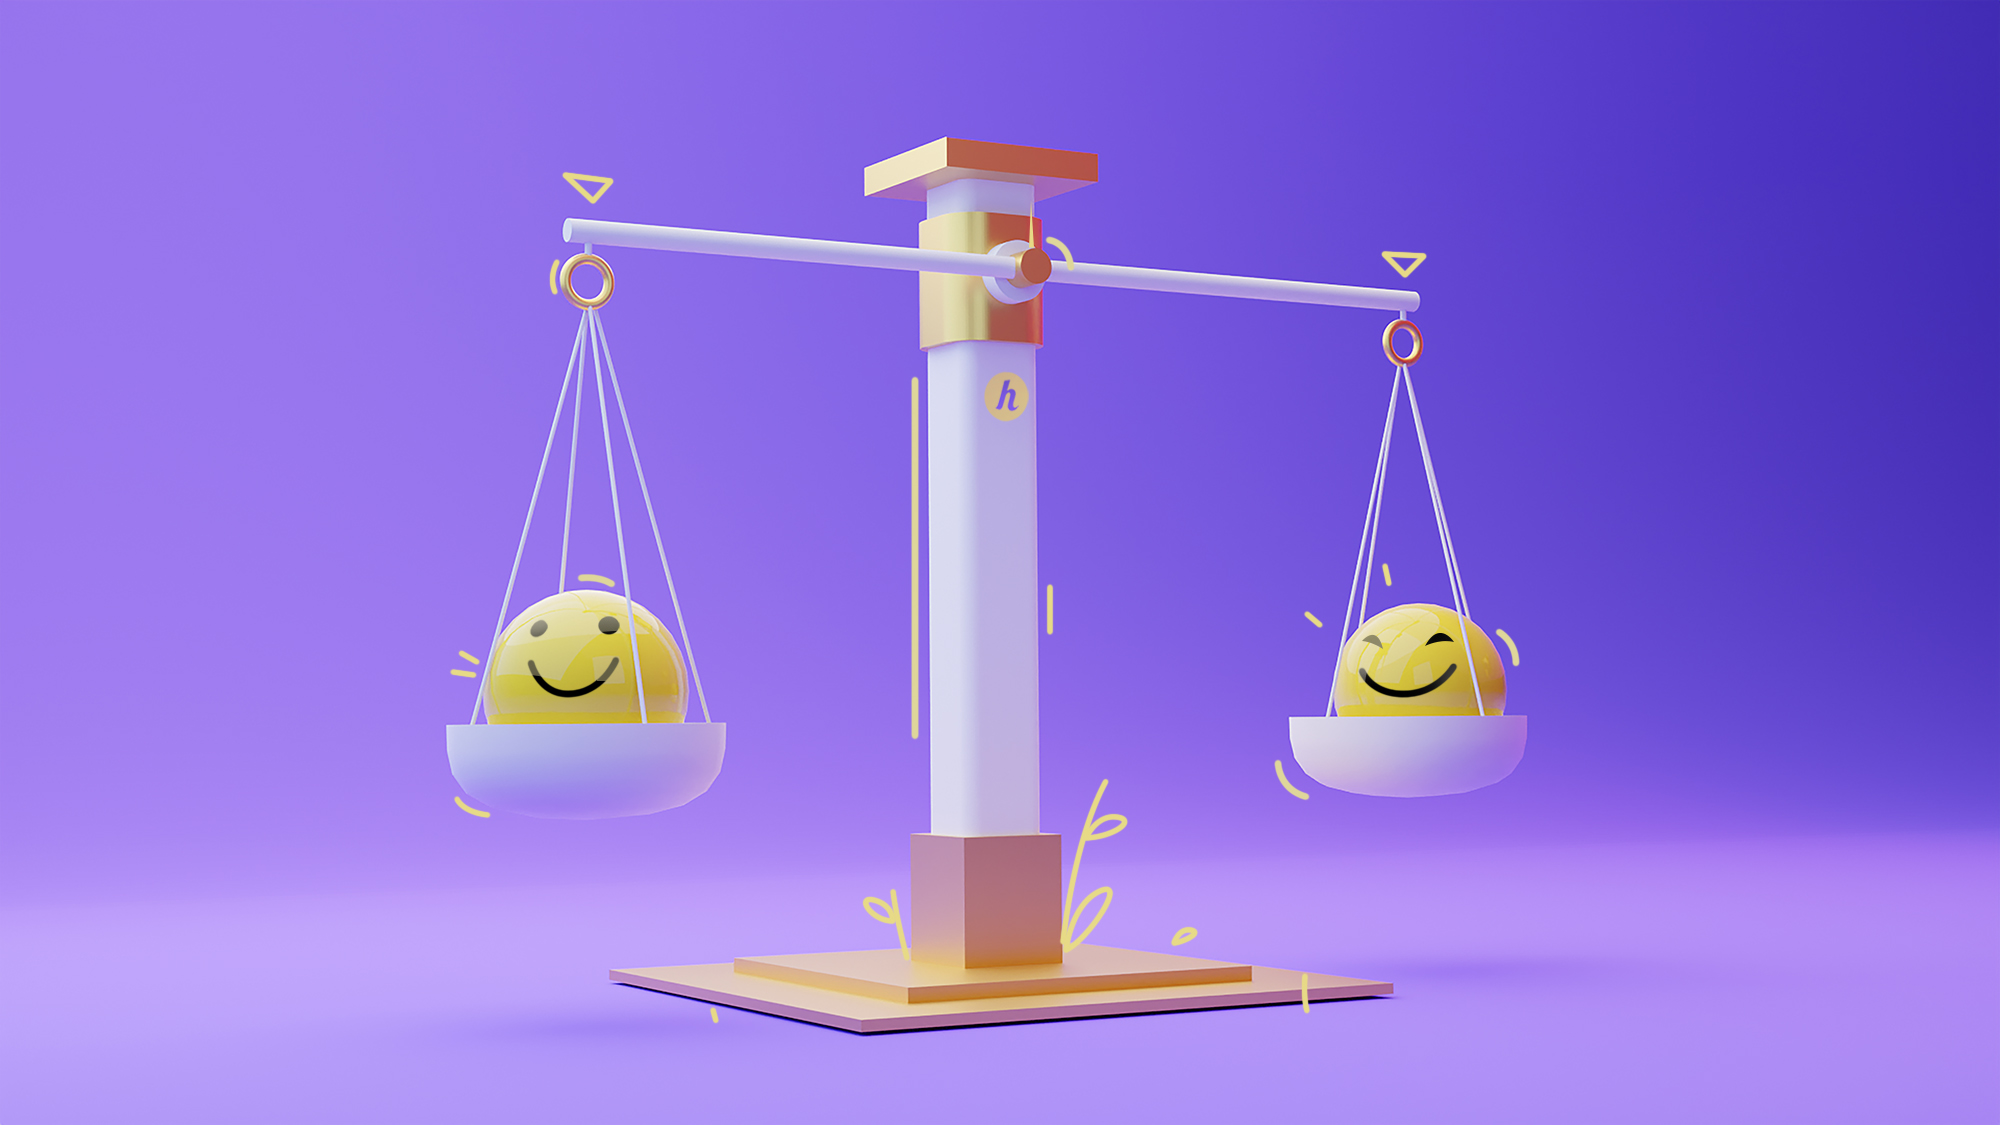 A scale balancing two happy faces